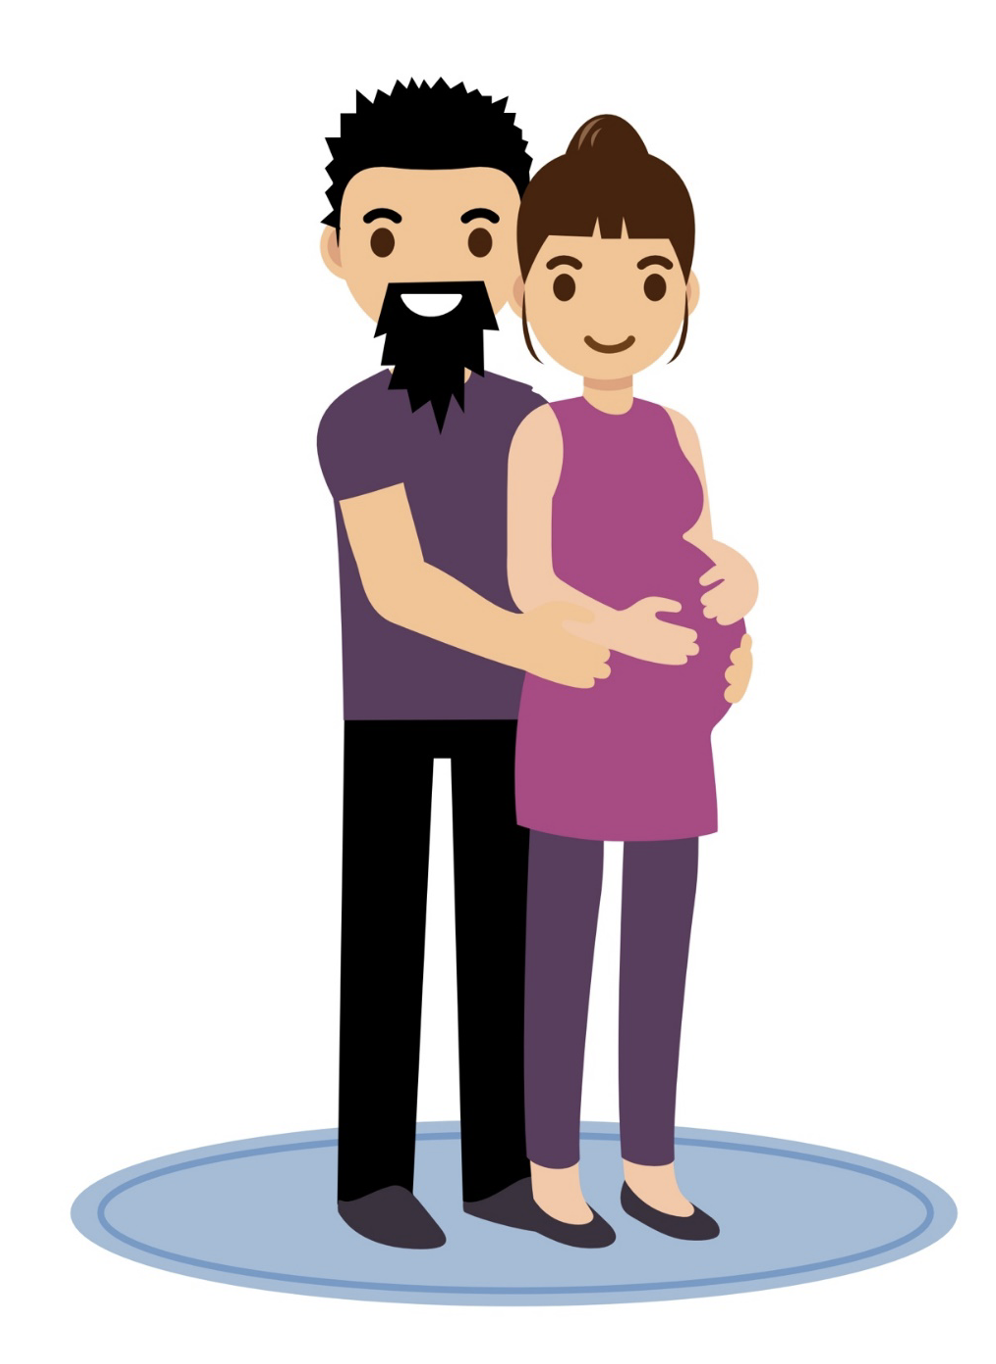 Pregnant person standing and being supported by someone else